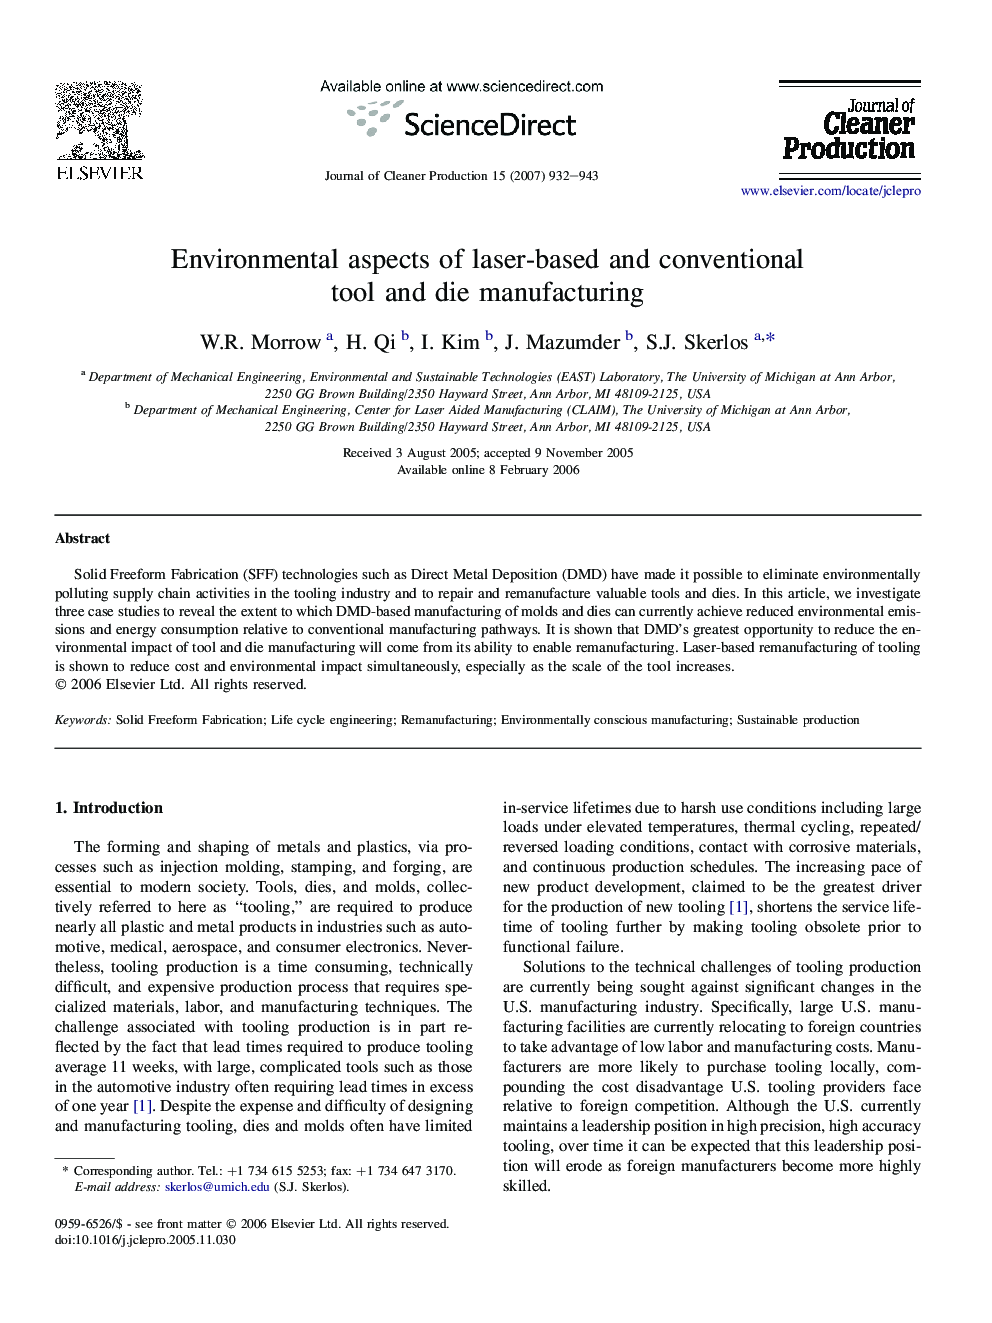 Environmental aspects of laser-based and conventional tool and die manufacturing